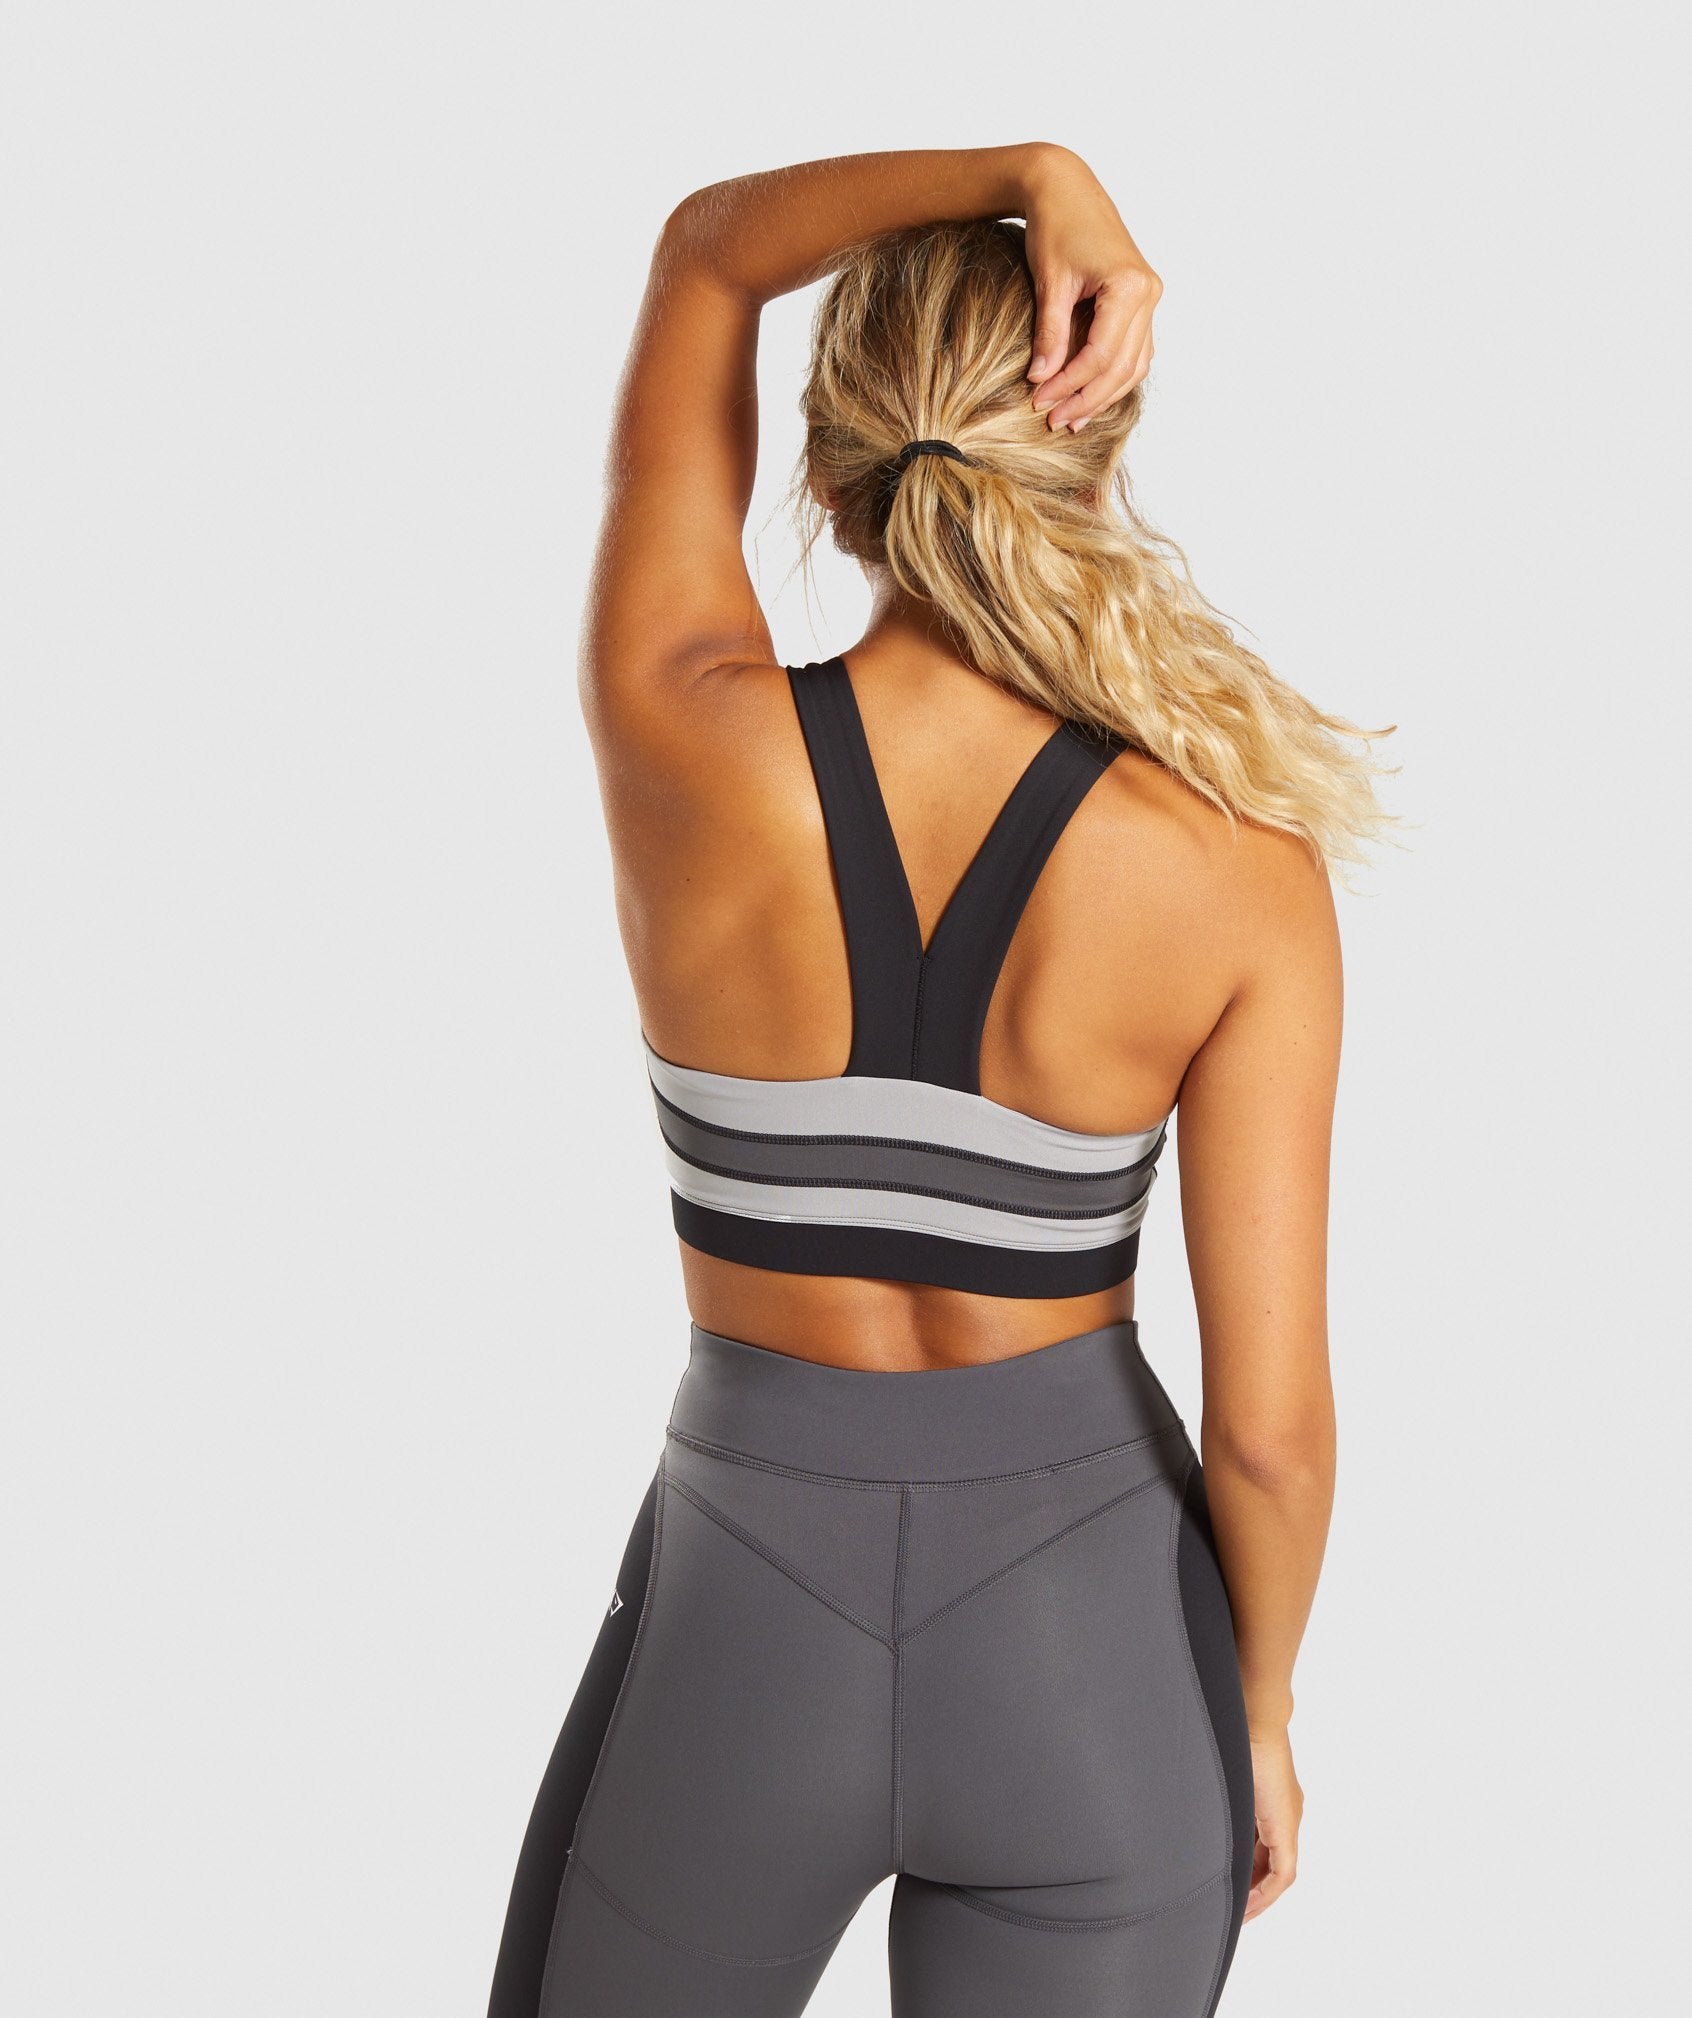 Illusion Sports Bra in Black/Charcoal/Light Grey - view 2